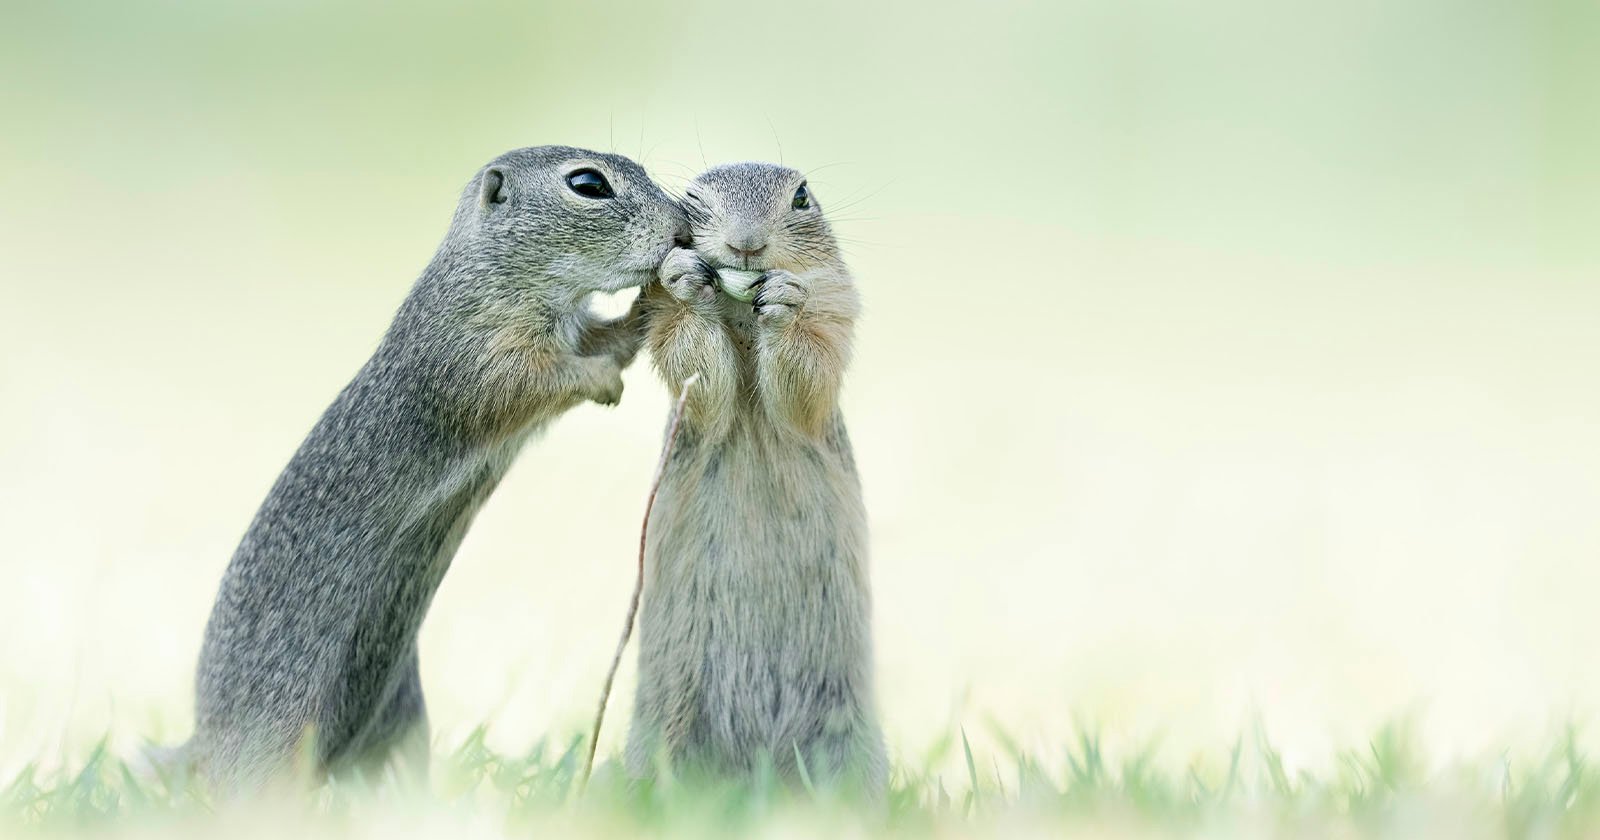 Two squirrels look like they're sharing a secret.